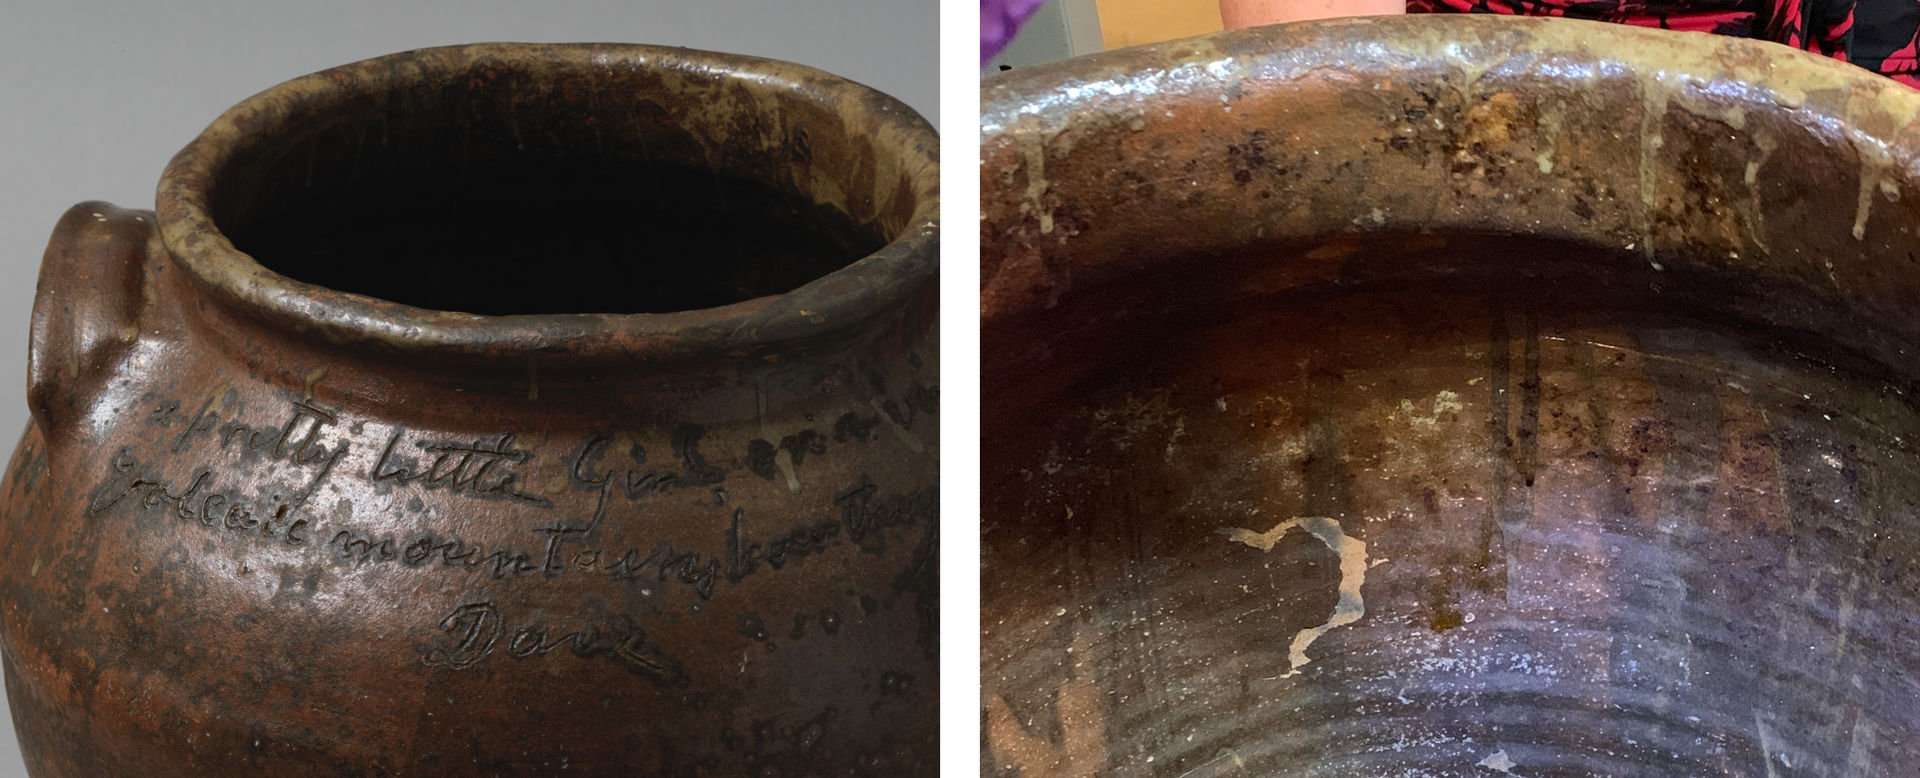 Composition image: on the left, a detail shot of a jar made by the enslaved potter Dave (later known as David Drake) with visible handwriting engraved onto the surface surrounding the edge of the jar’s opening, and on the right a detail shot of the jar’s interior with visible drip residue on the opening edges and interior walls.